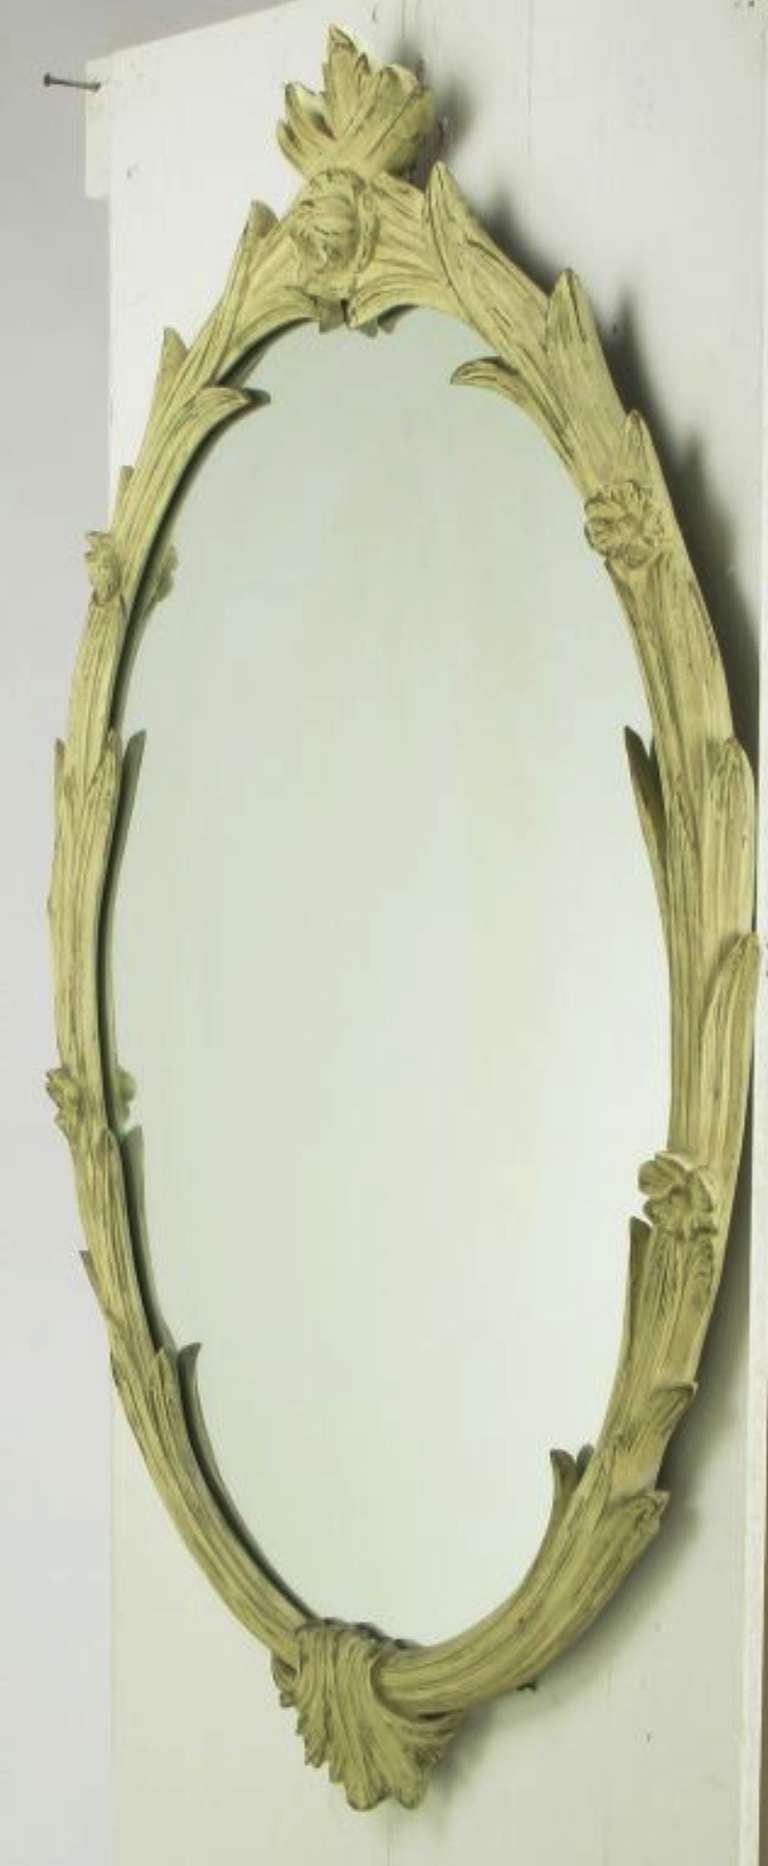 An exceptional mirror in hand-carved wood with foliate detail. Gold leafed, and then finished in a distressed ivory wash to reveal the gilt underlayer. Very fine carving and some aging to the mercury backing give this mirror character.